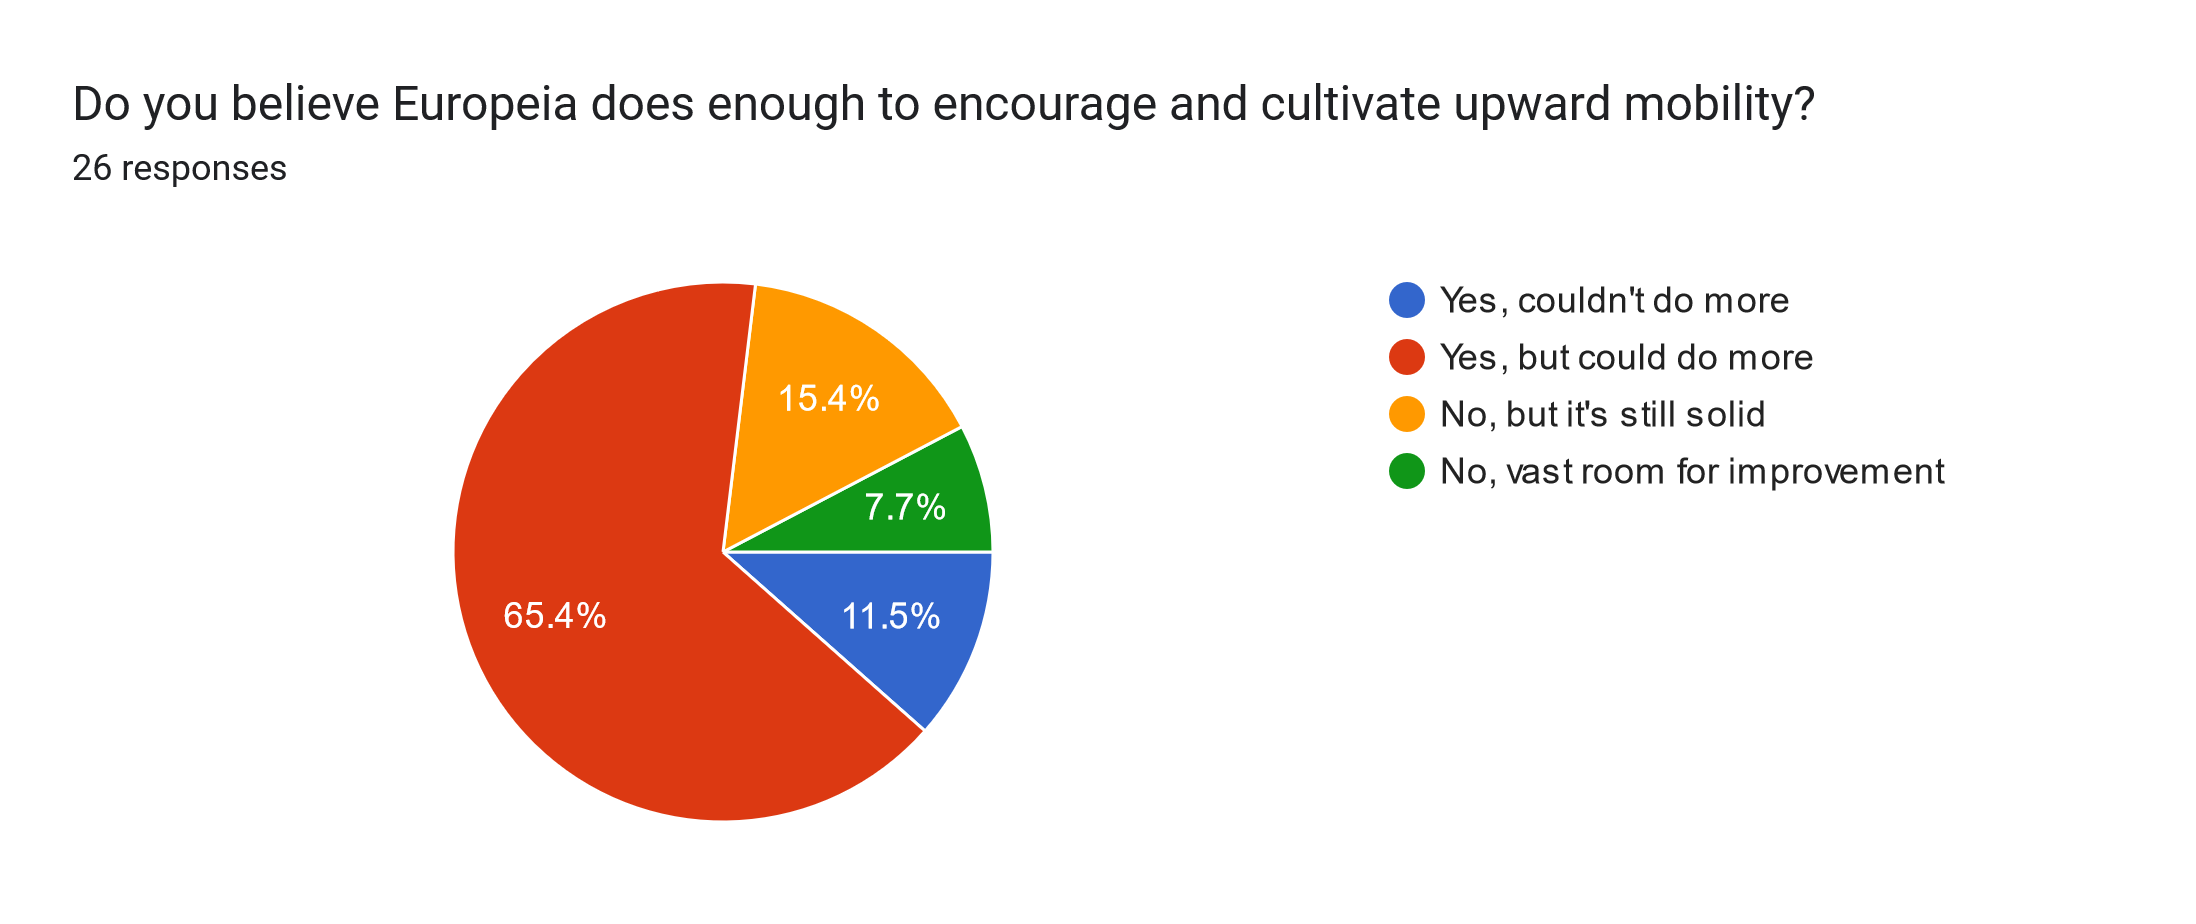 Forms response chart. Question title: Do you believe Europeia does enough to encourage and cultivate upward mobility?. Number of responses: 26 responses.